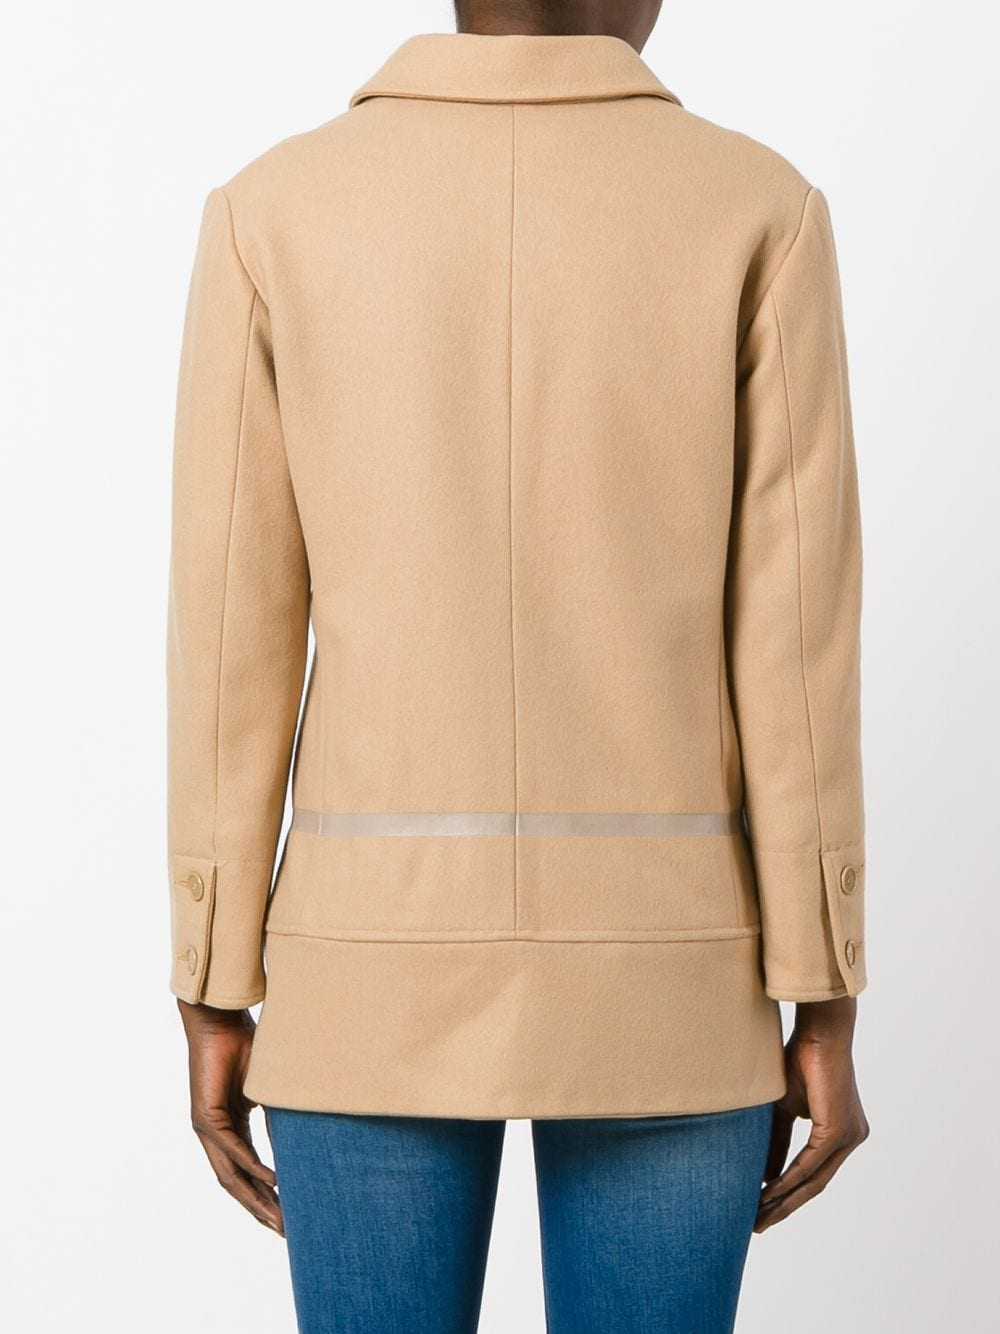 Helmut Lang Pre-Owned single breasted coat - Neut… - image 4